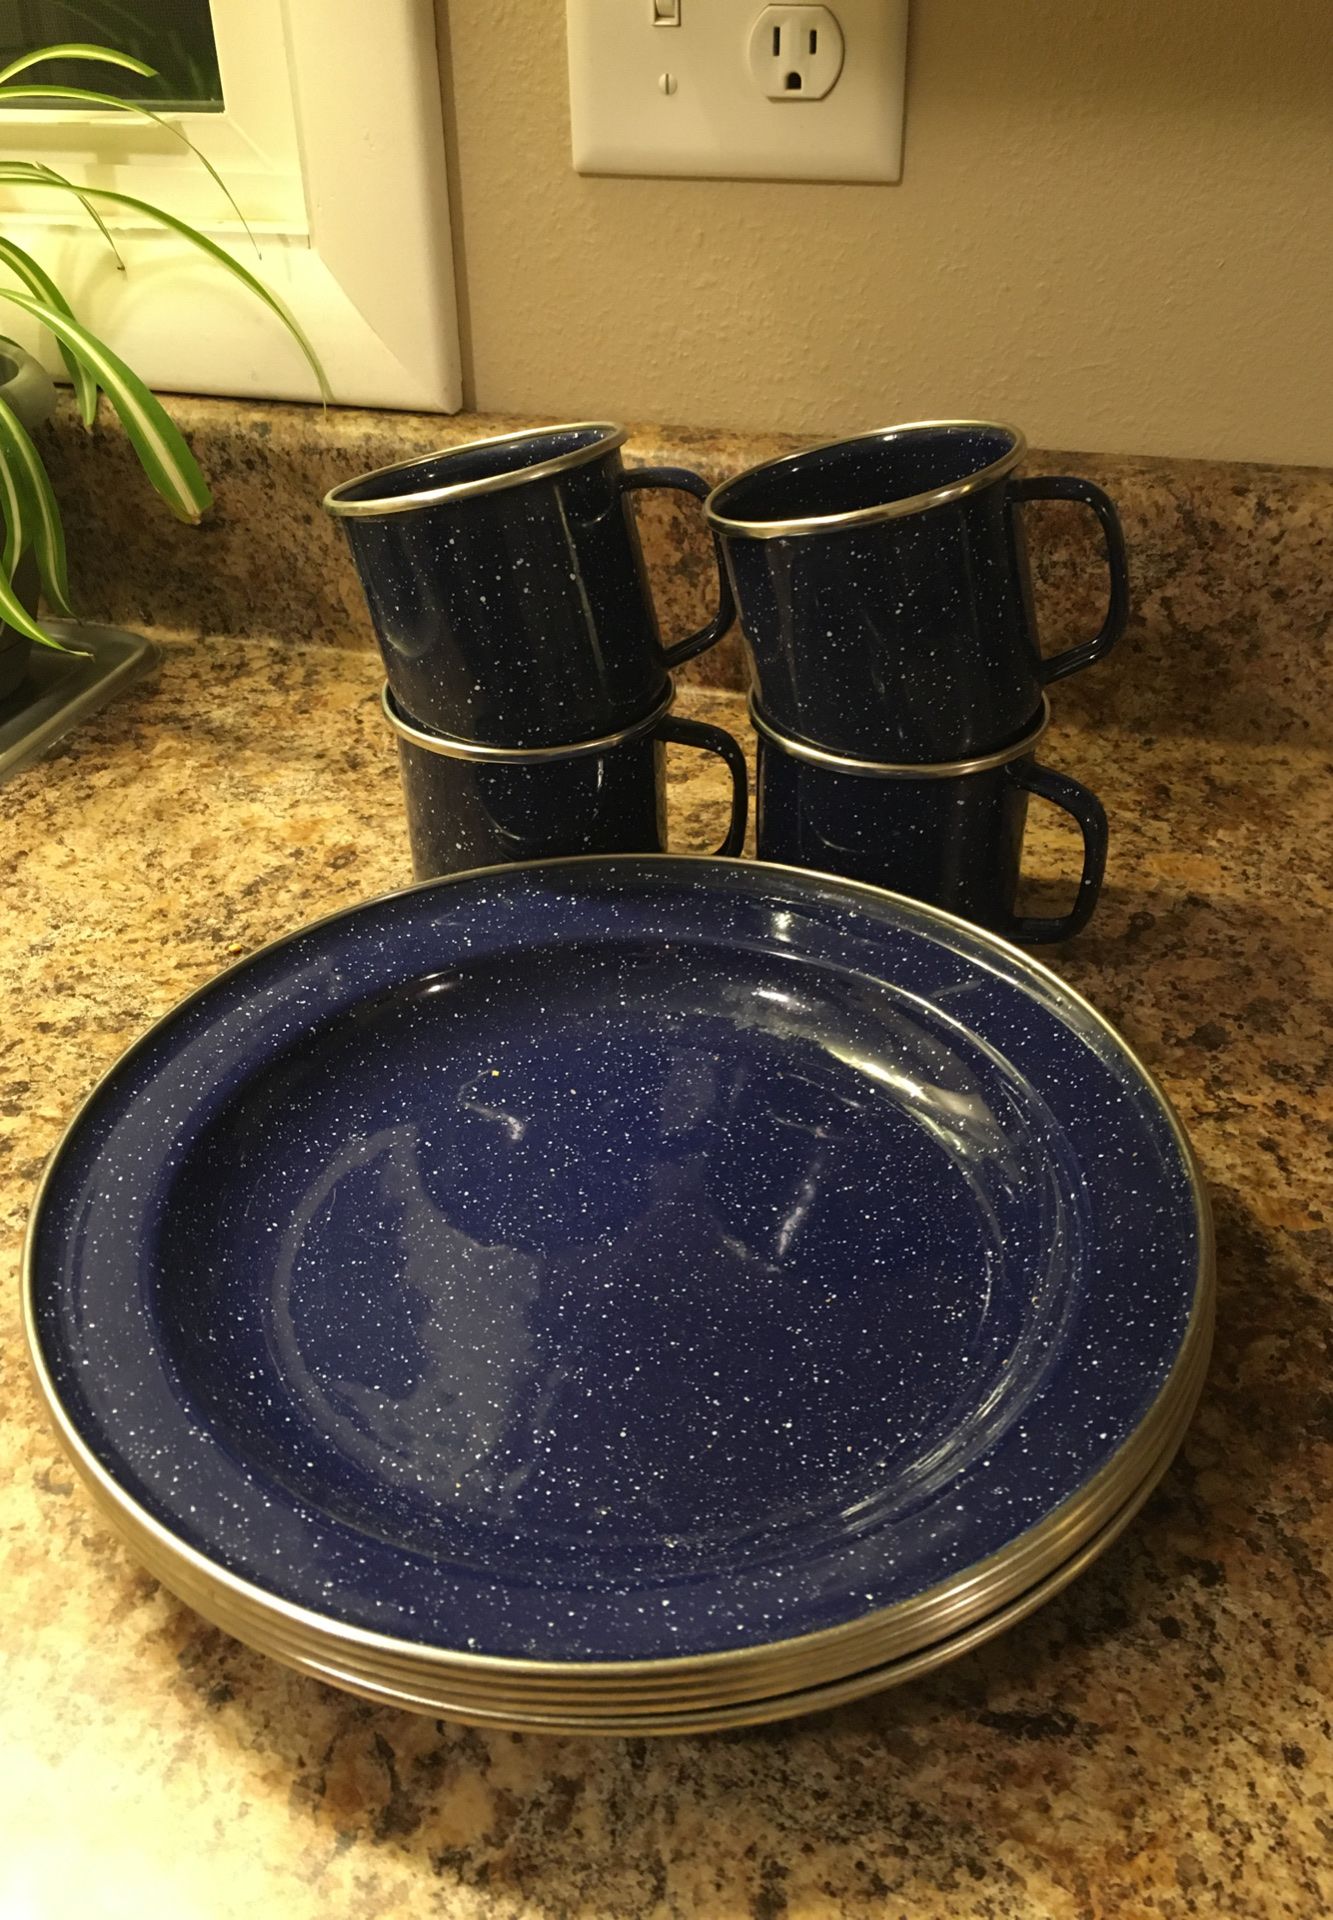 “Camping” dishes